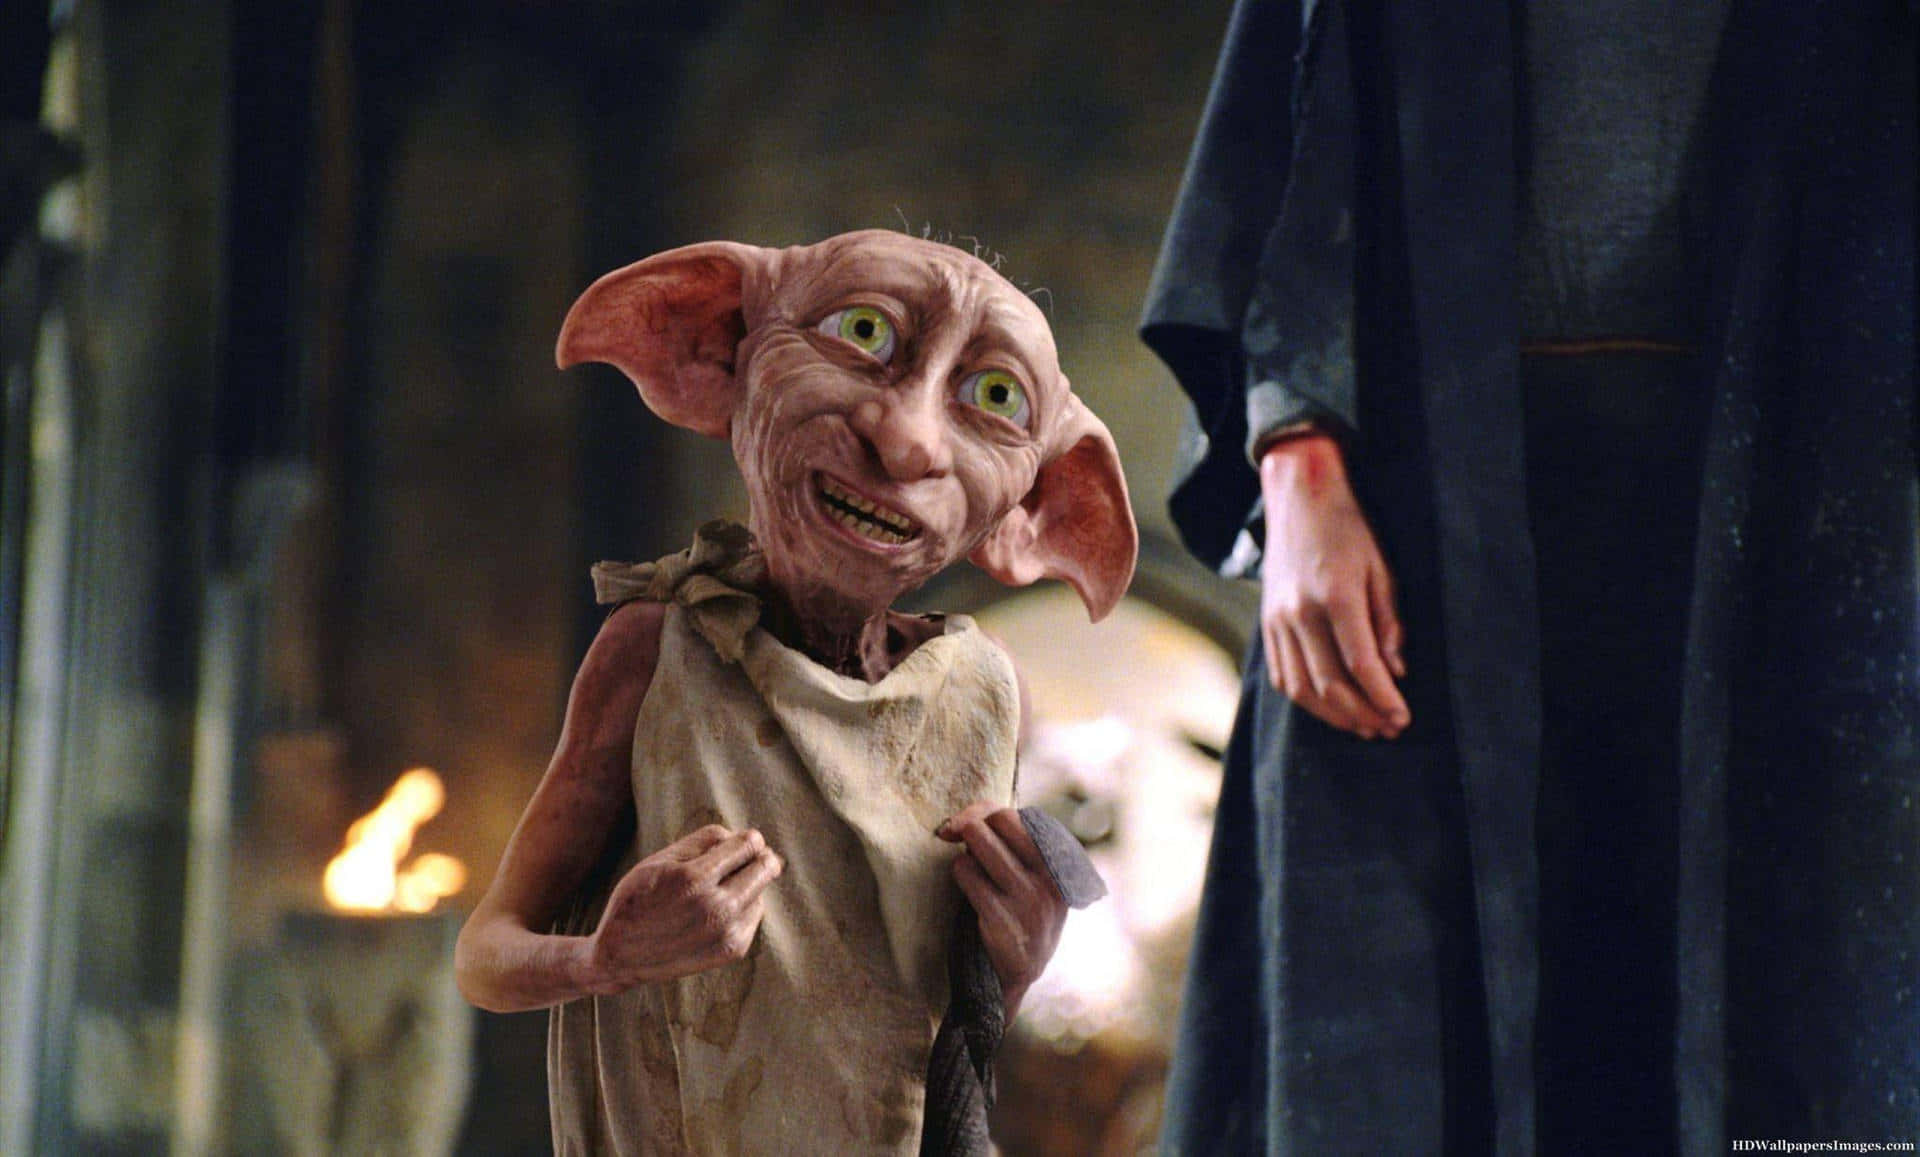 "Dobby the house elf, loyal friend to Harry Potter" Wallpaper